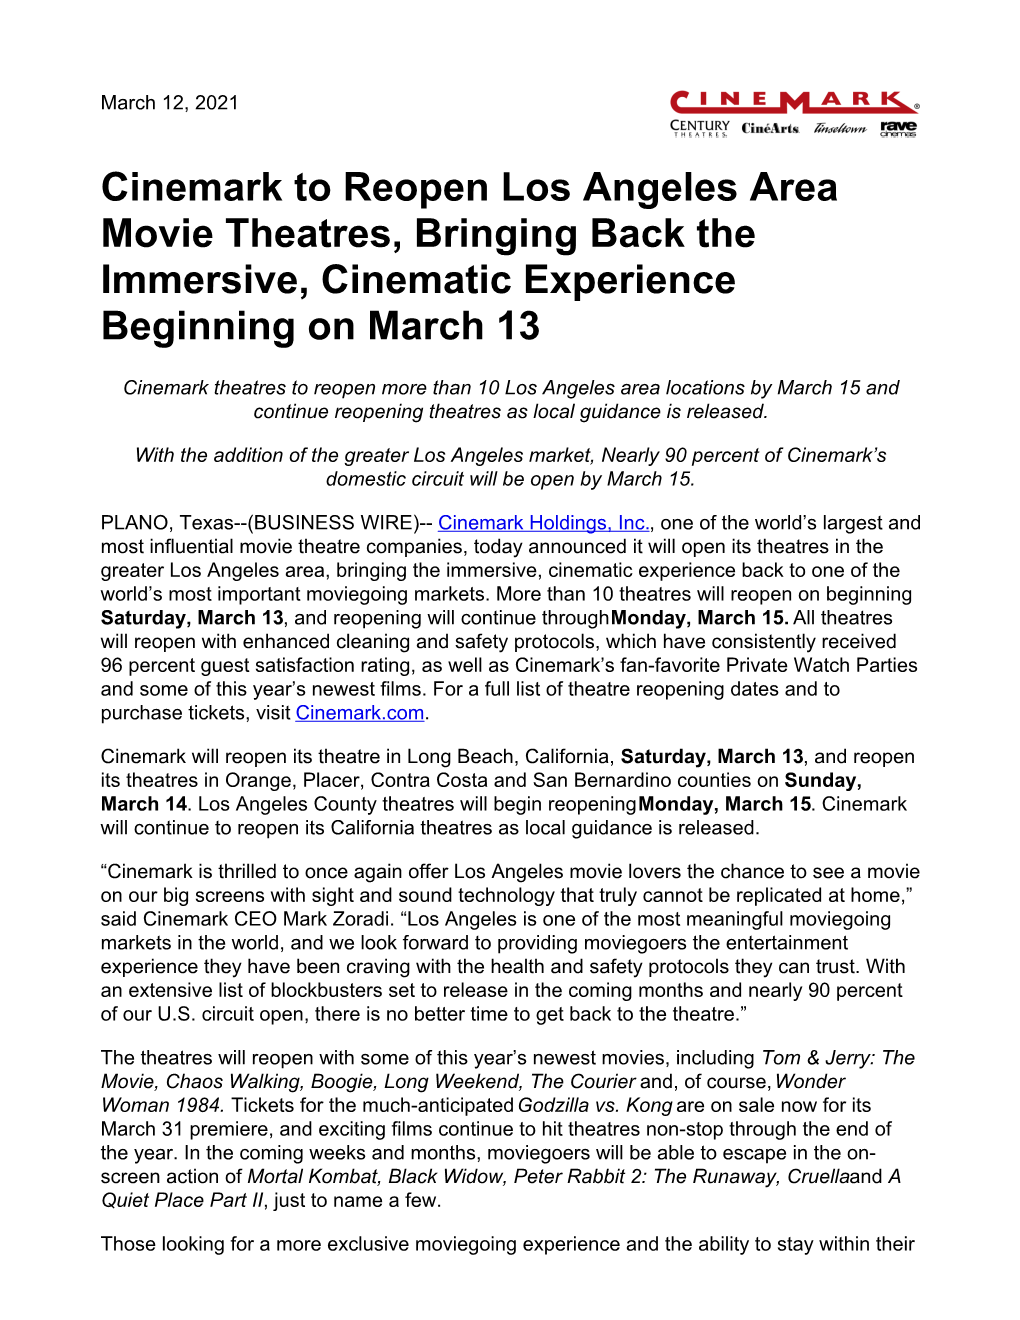 Cinemark to Reopen Los Angeles Area Movie Theatres, Bringing Back the Immersive, Cinematic Experience Beginning on March 13